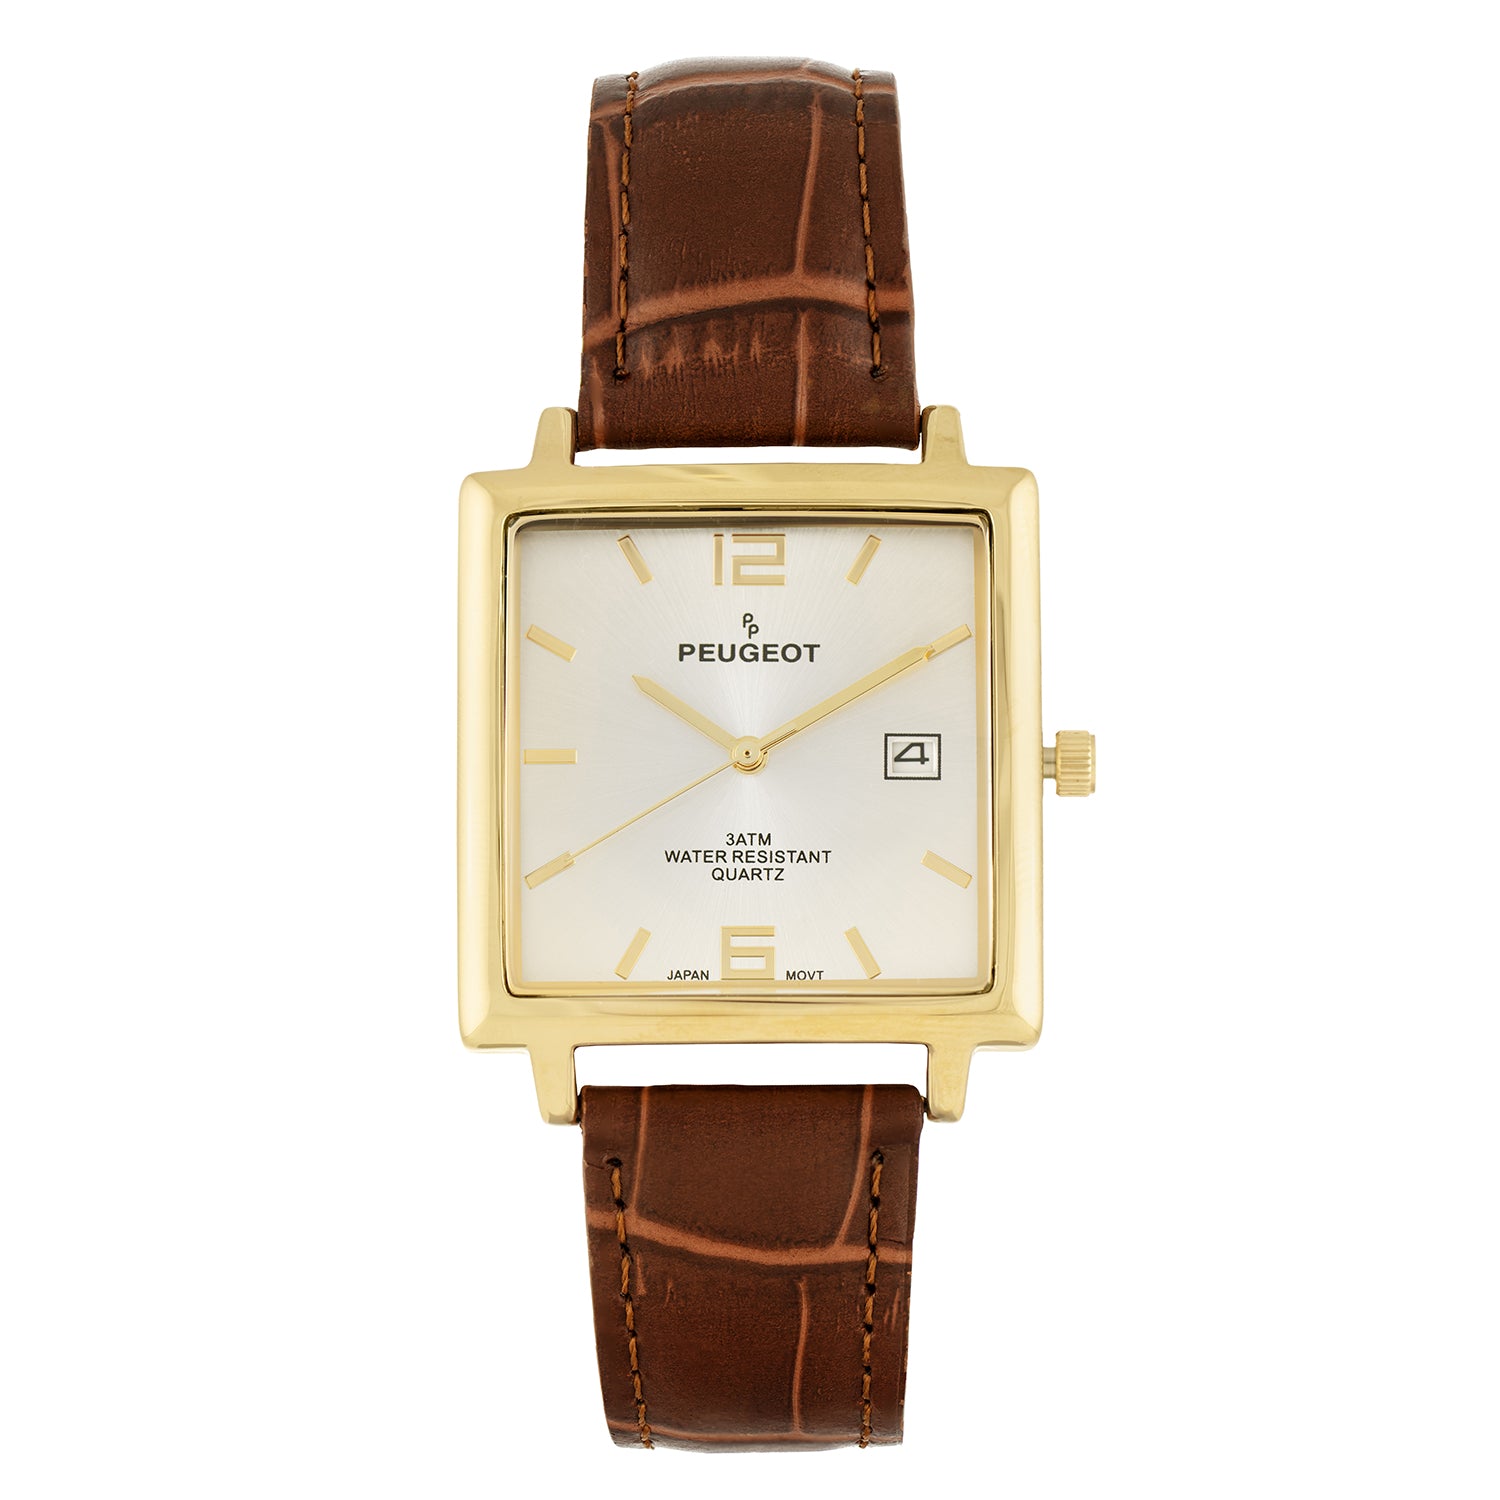 Peugeot Men's Watch Square Gold with Date Brown Leather Strap